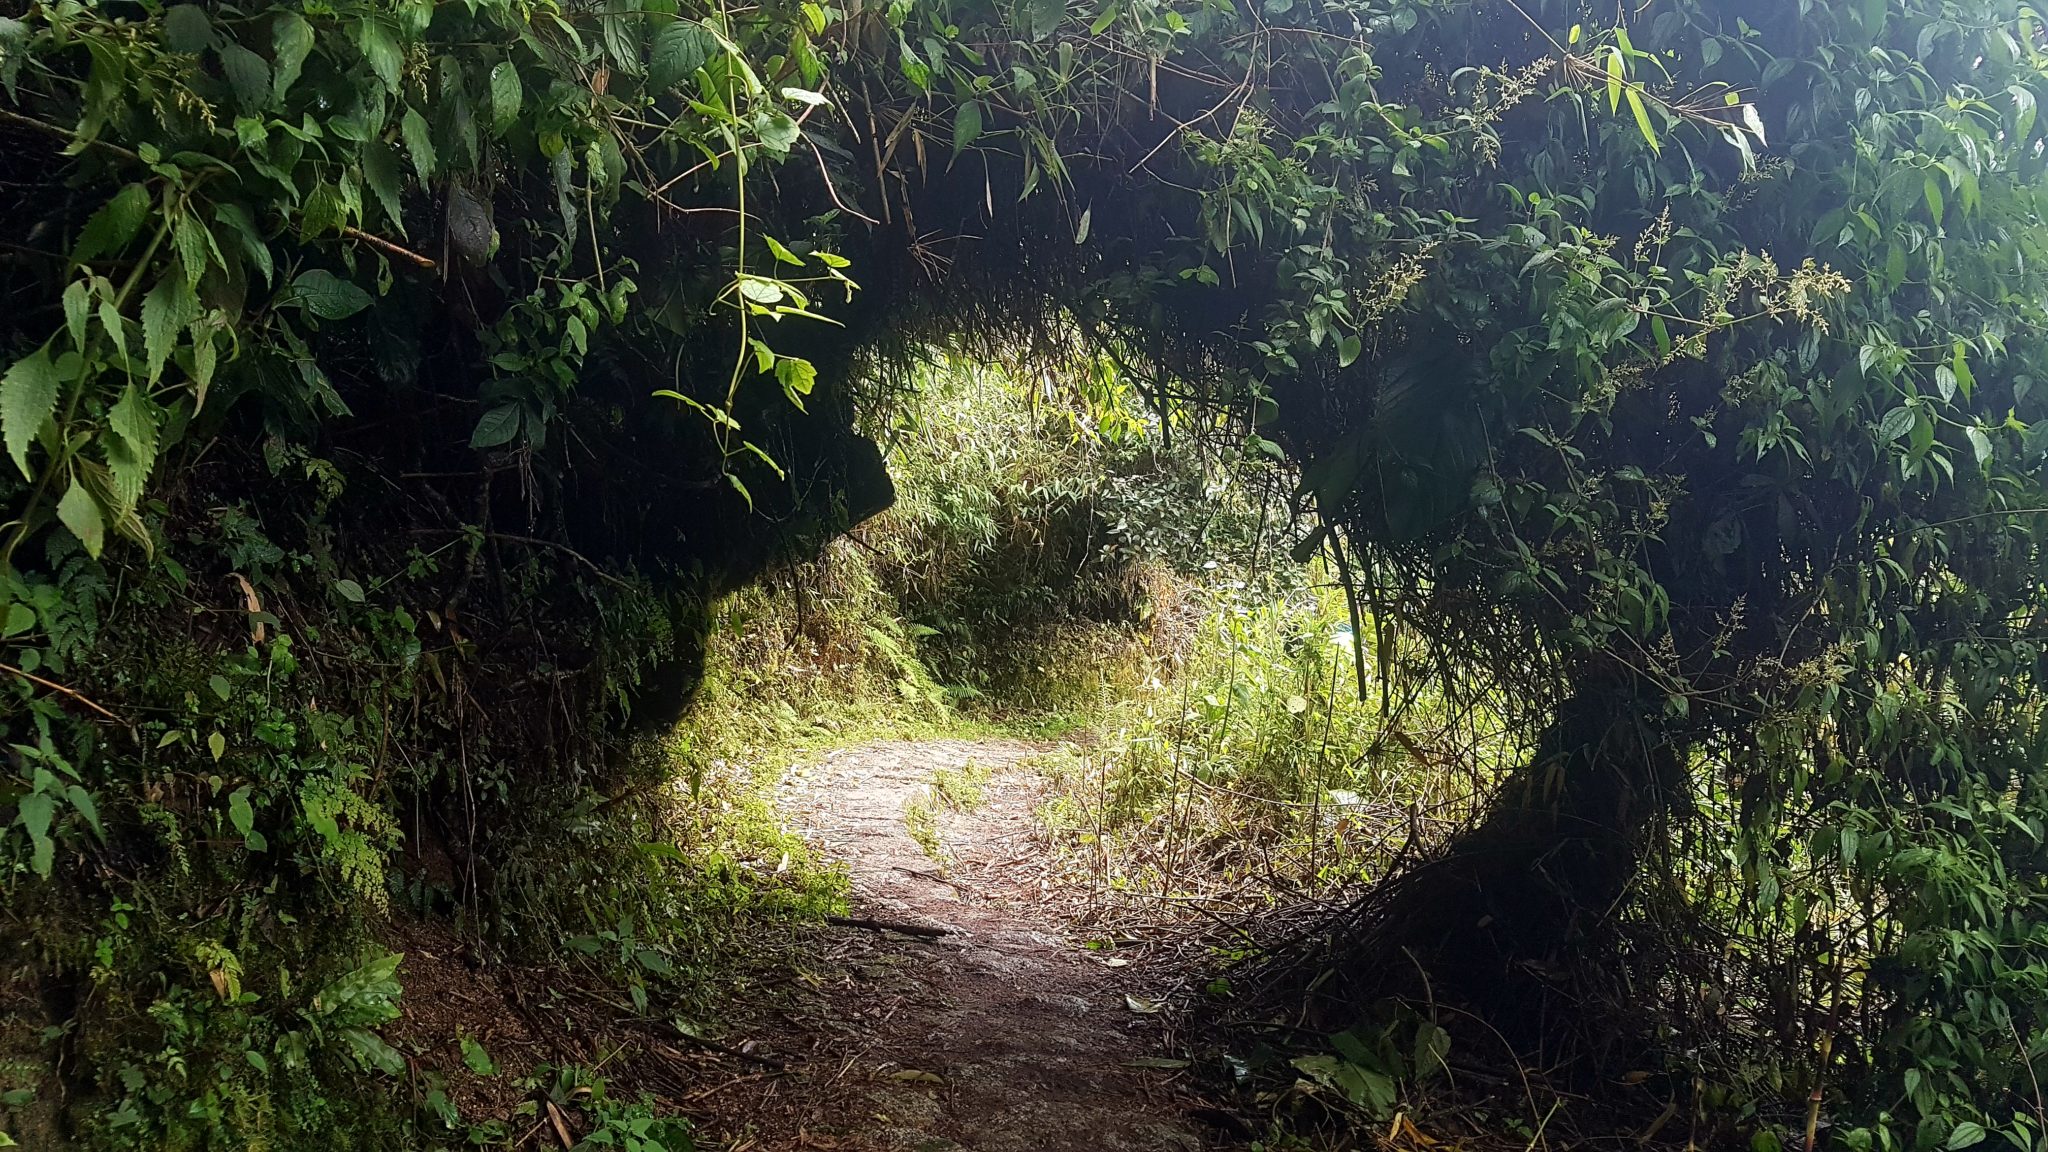 Loved that the Plants Covered the Path